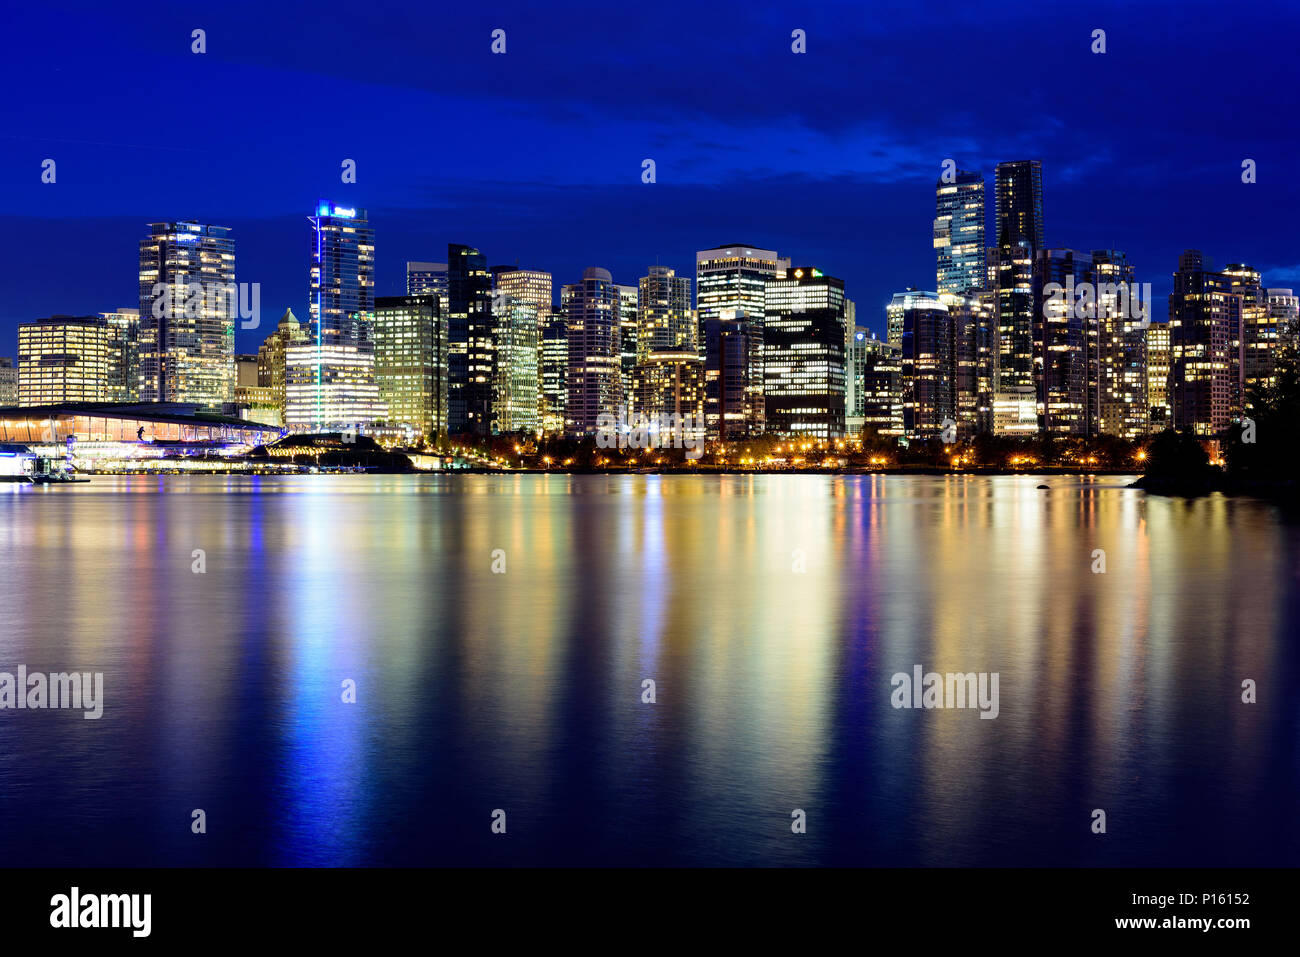 Vancouver city by night, British Columbia, Canada. Photographed from the Stanley Park. Stock Photo